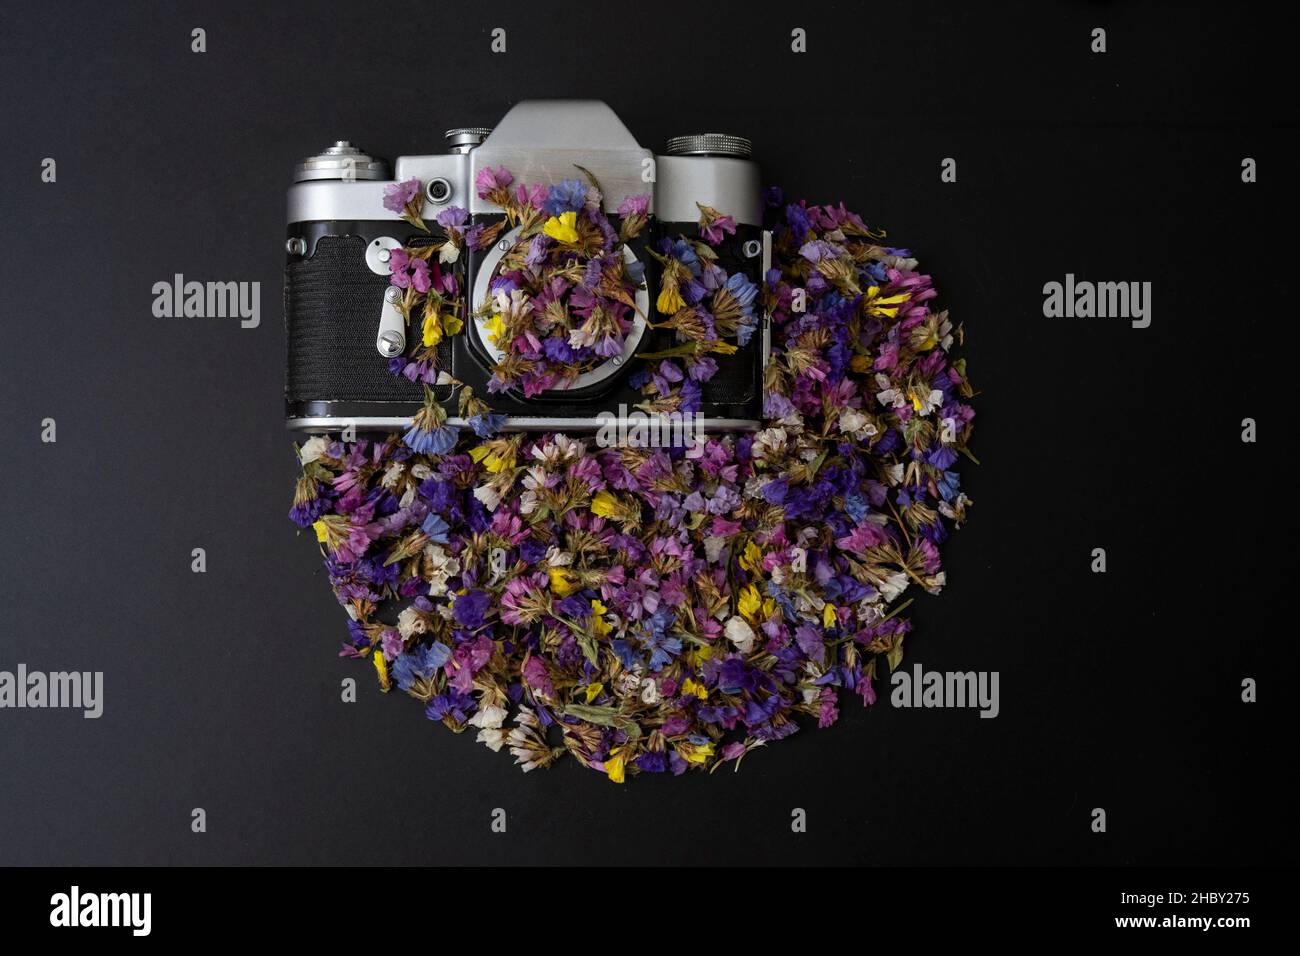 Vintage movie reels surrounded by flowers